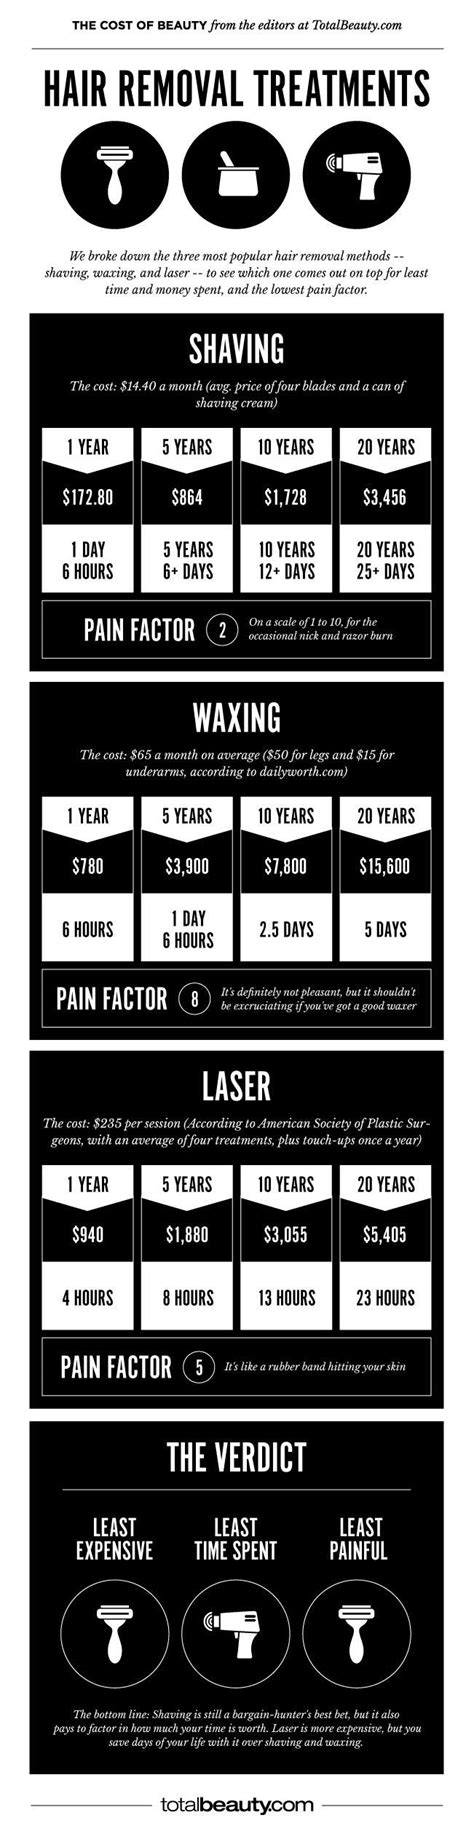 We have a highly experienced and trained therapist with result driven tre. Shaving vs. Waxing vs. Laser: How Much Does Each Cost Over ...